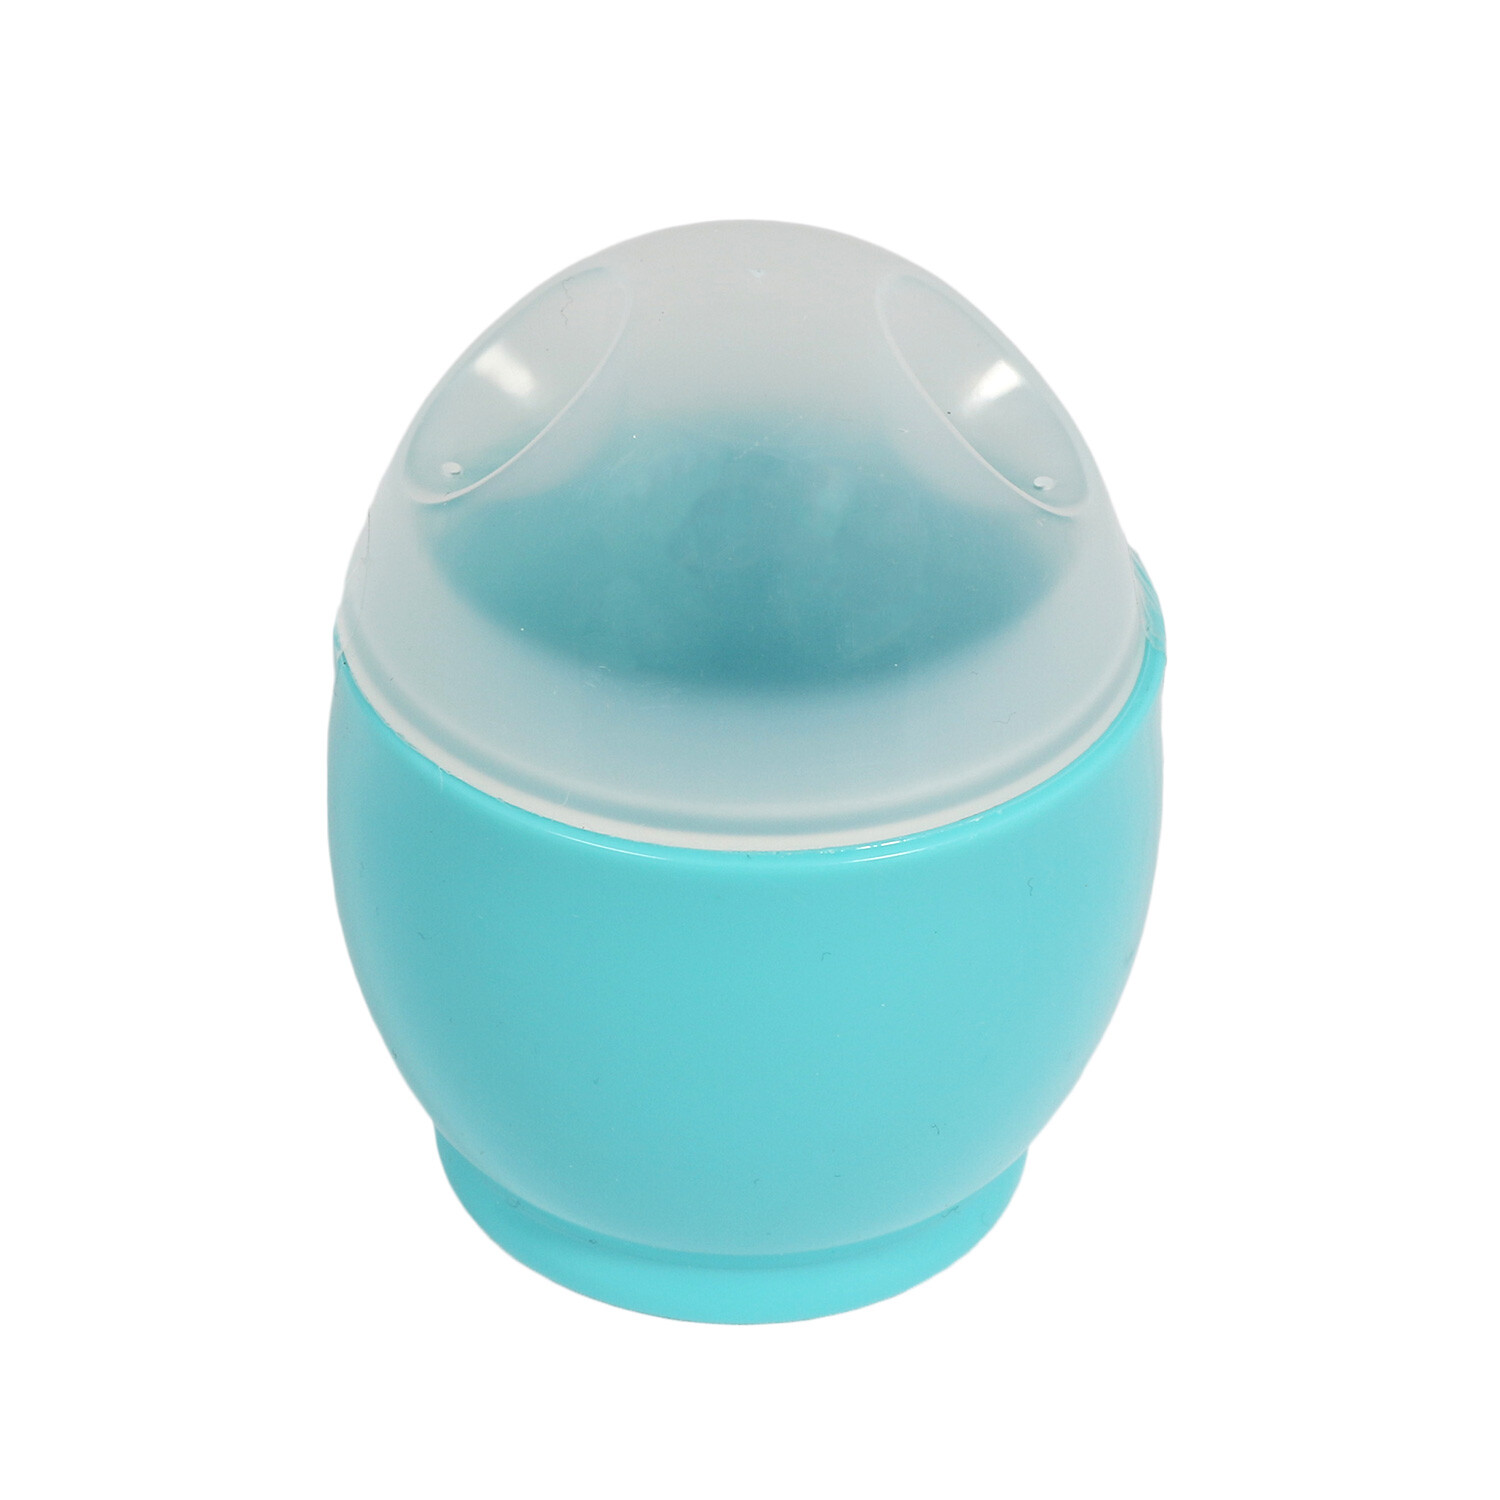 Microwavable Egg Cooker - Blue Image